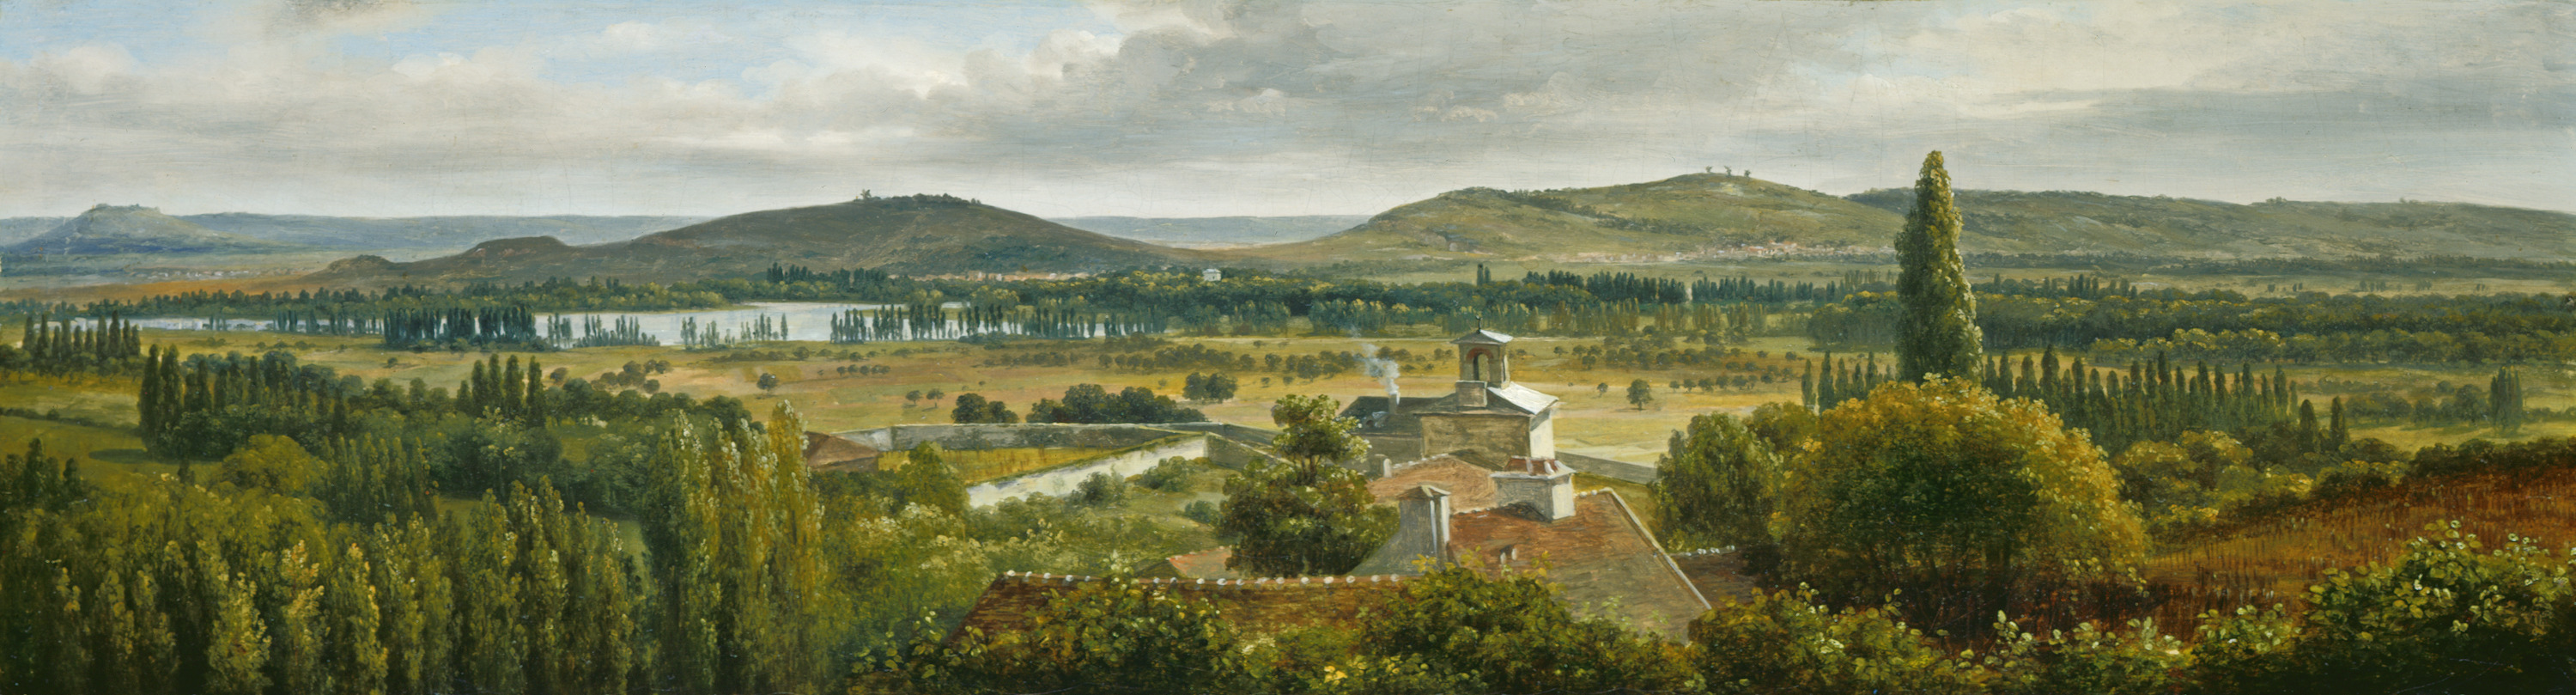 Théodore Rousseau (French, 1812 - 1867 ), Panoramic View of the Ile-de-France, c. 1830, oil on canvas, Chester Dale Fund